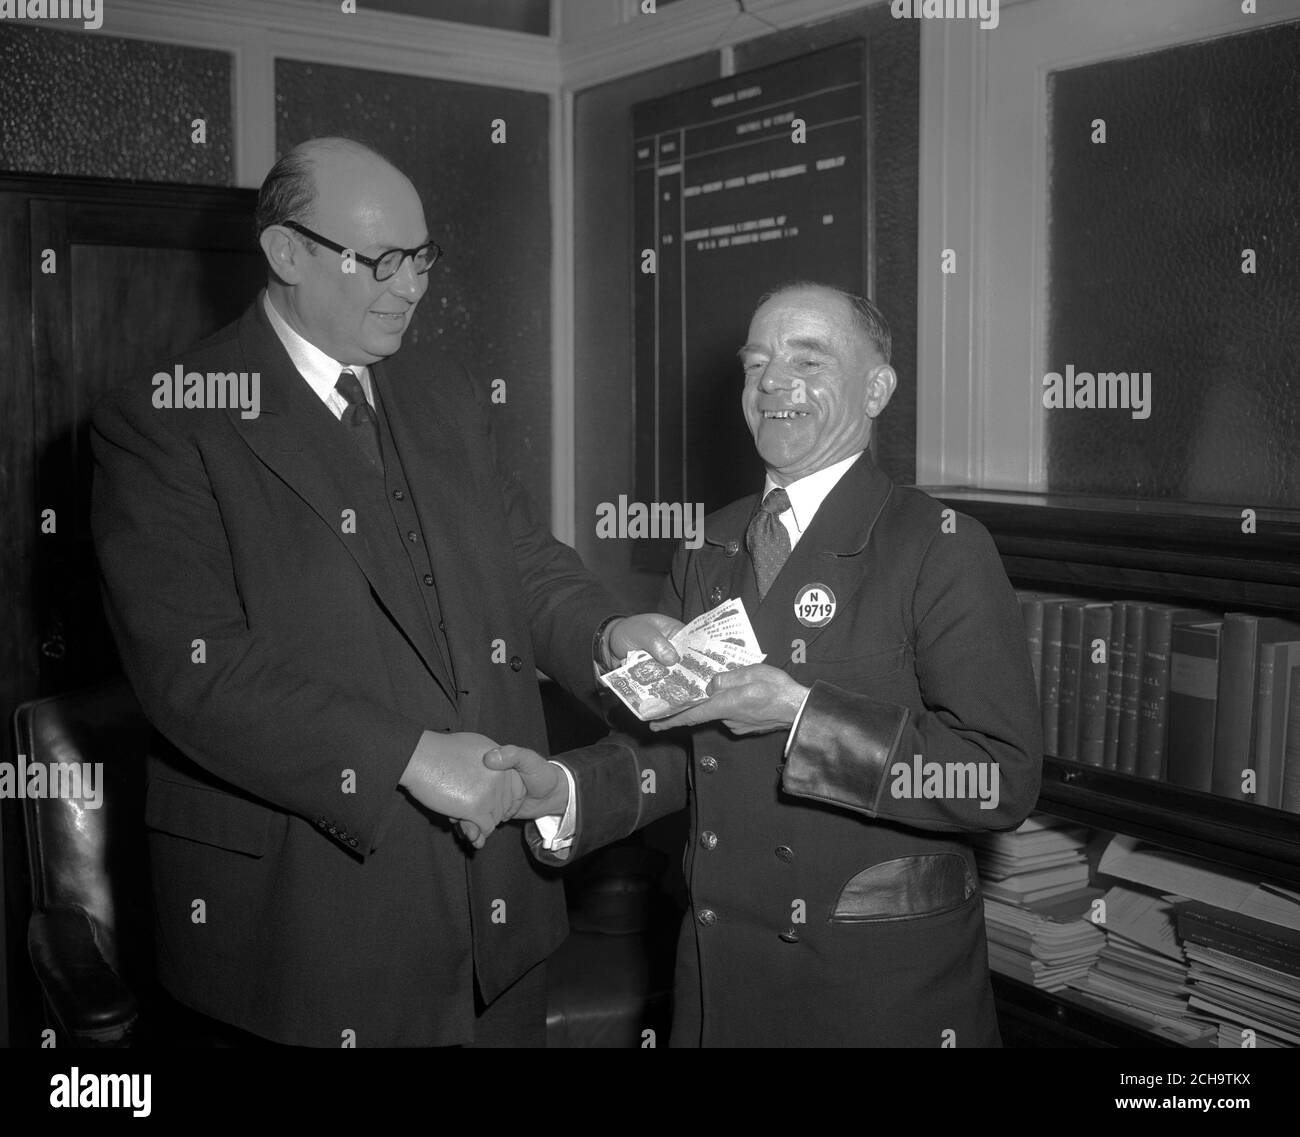 Smiling bus driver holding ten £1 notes is Albert Edward Gunter, who 'jumped the gap' when London's Tower Bridge opened while his bus was crossing it. The reward, presented at London Transport headquarters in Westminster by John B. Burnell, Operating Manager of London Transport's Central Road Services, was a gift from the Board to mark his heroism. Stock Photo